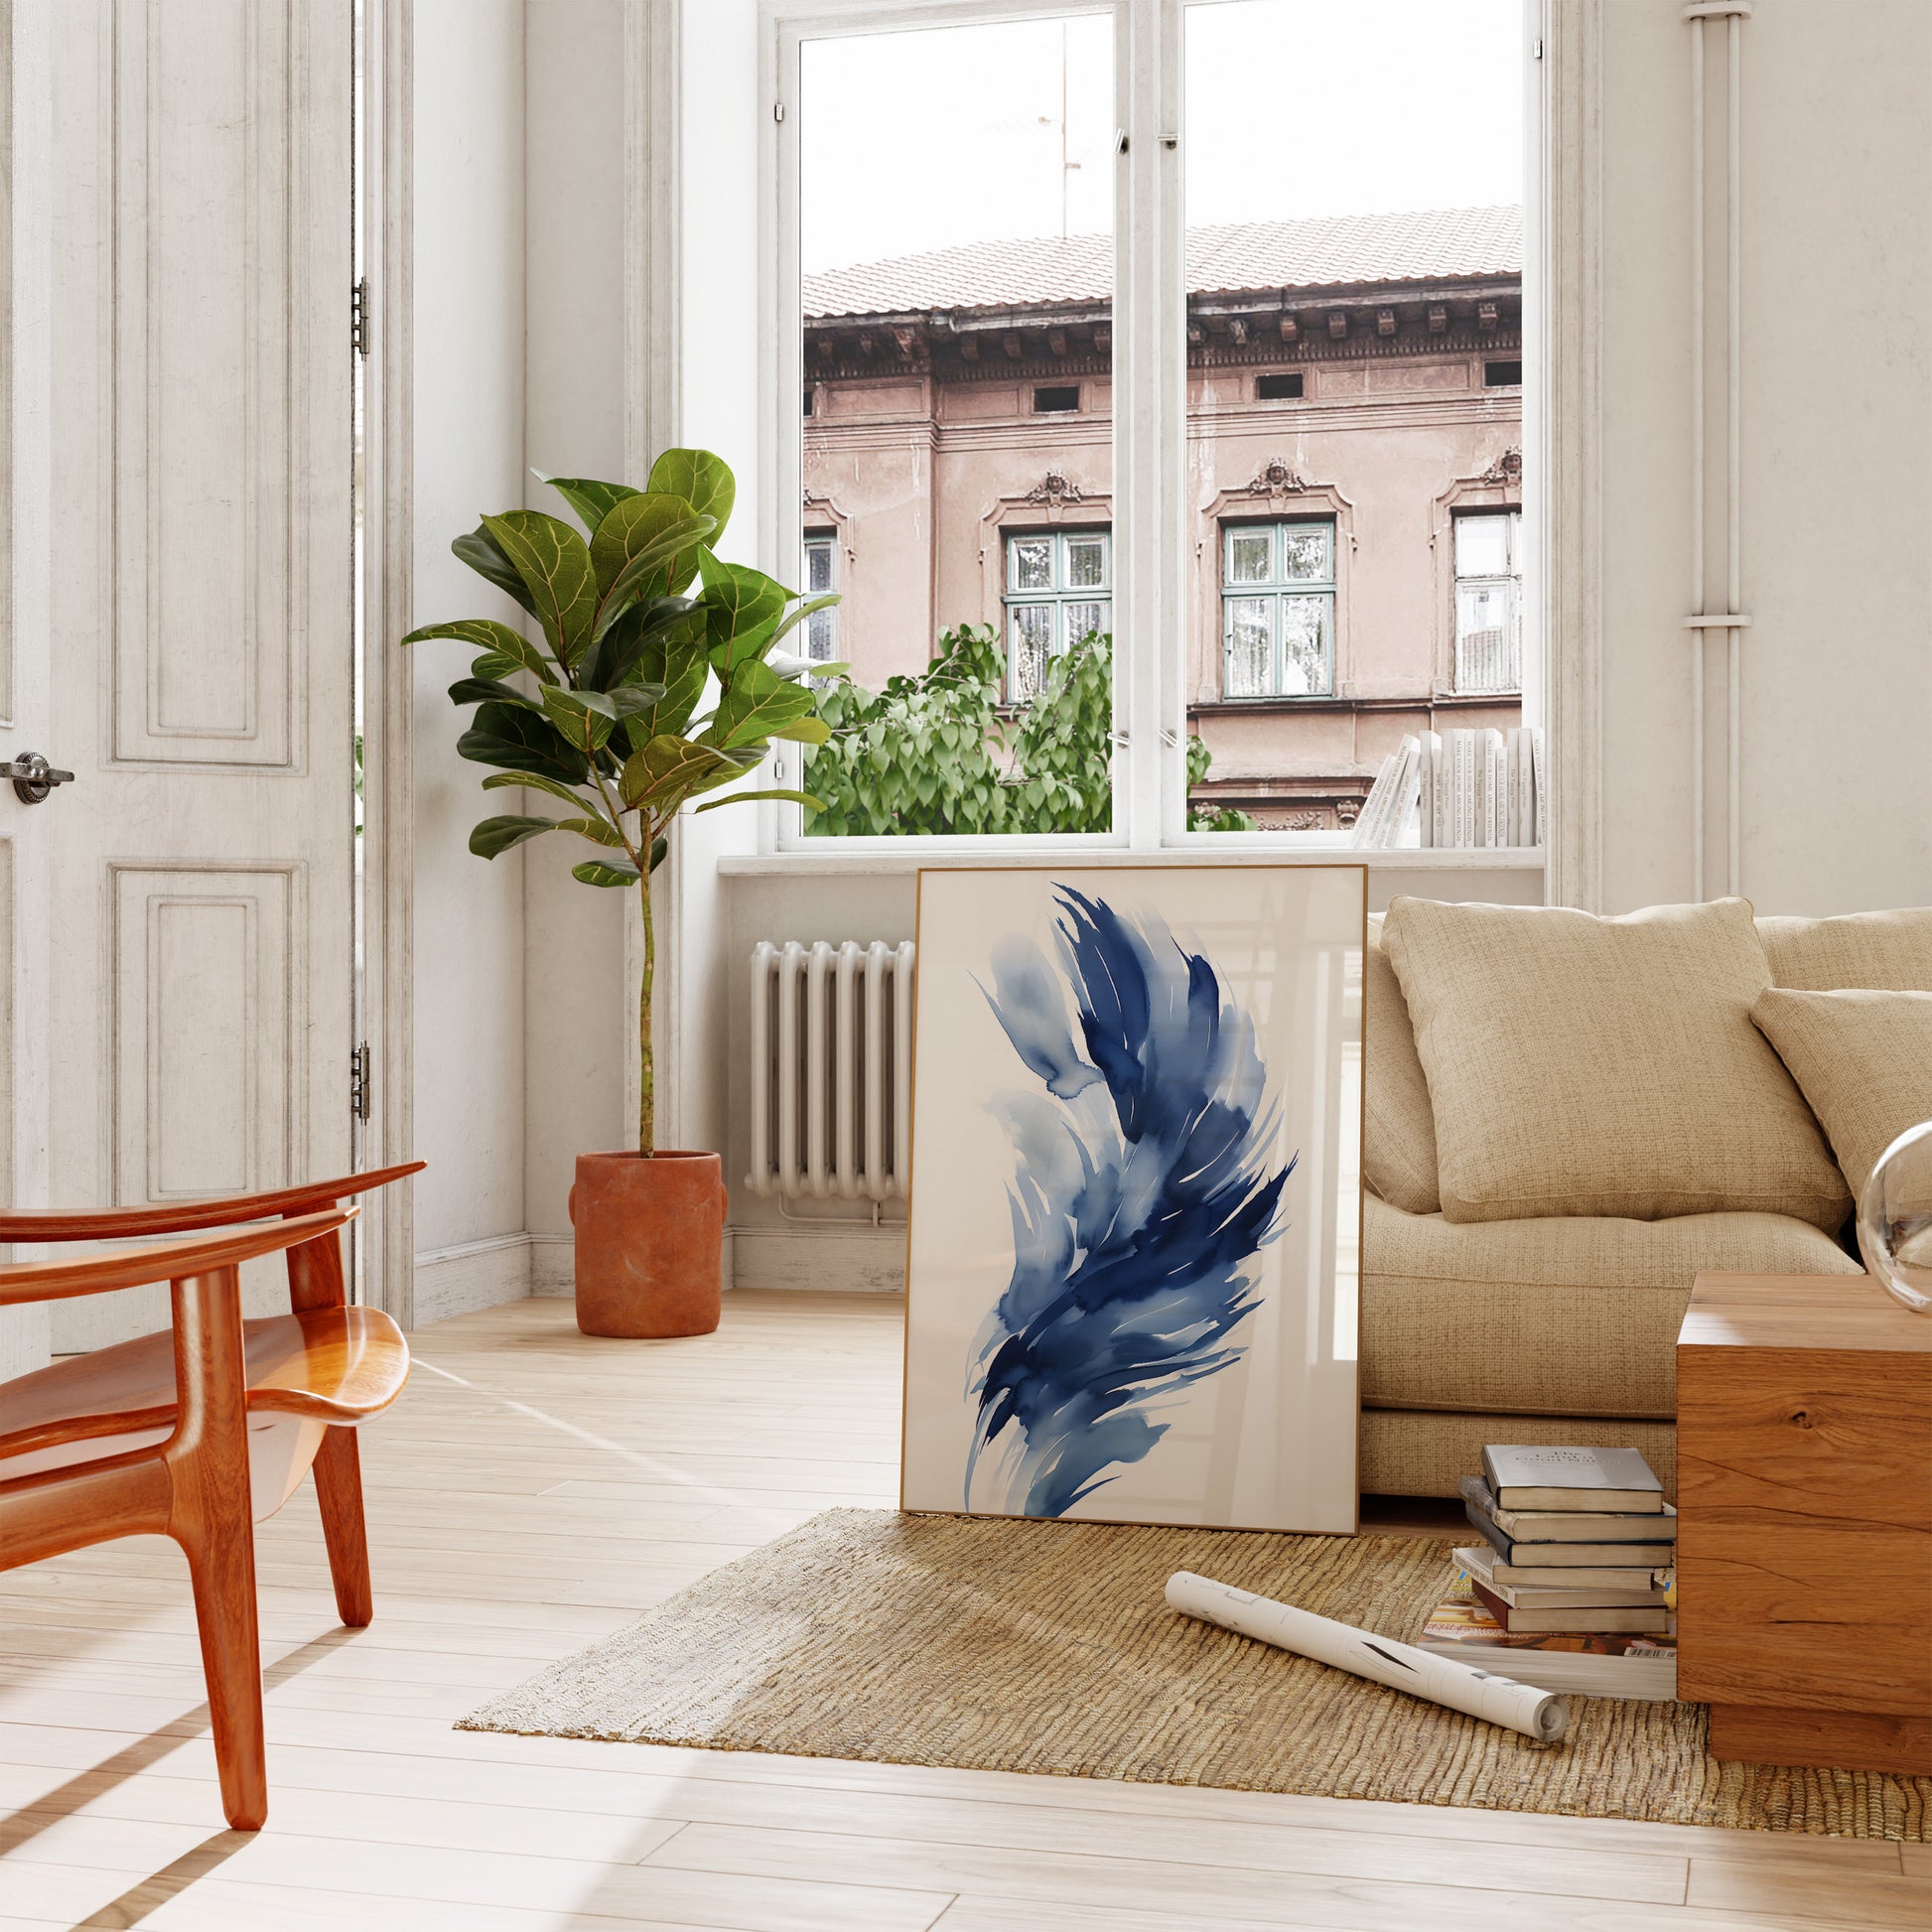 A cozy living room with a sofa, modern artwork, and a potted plant.